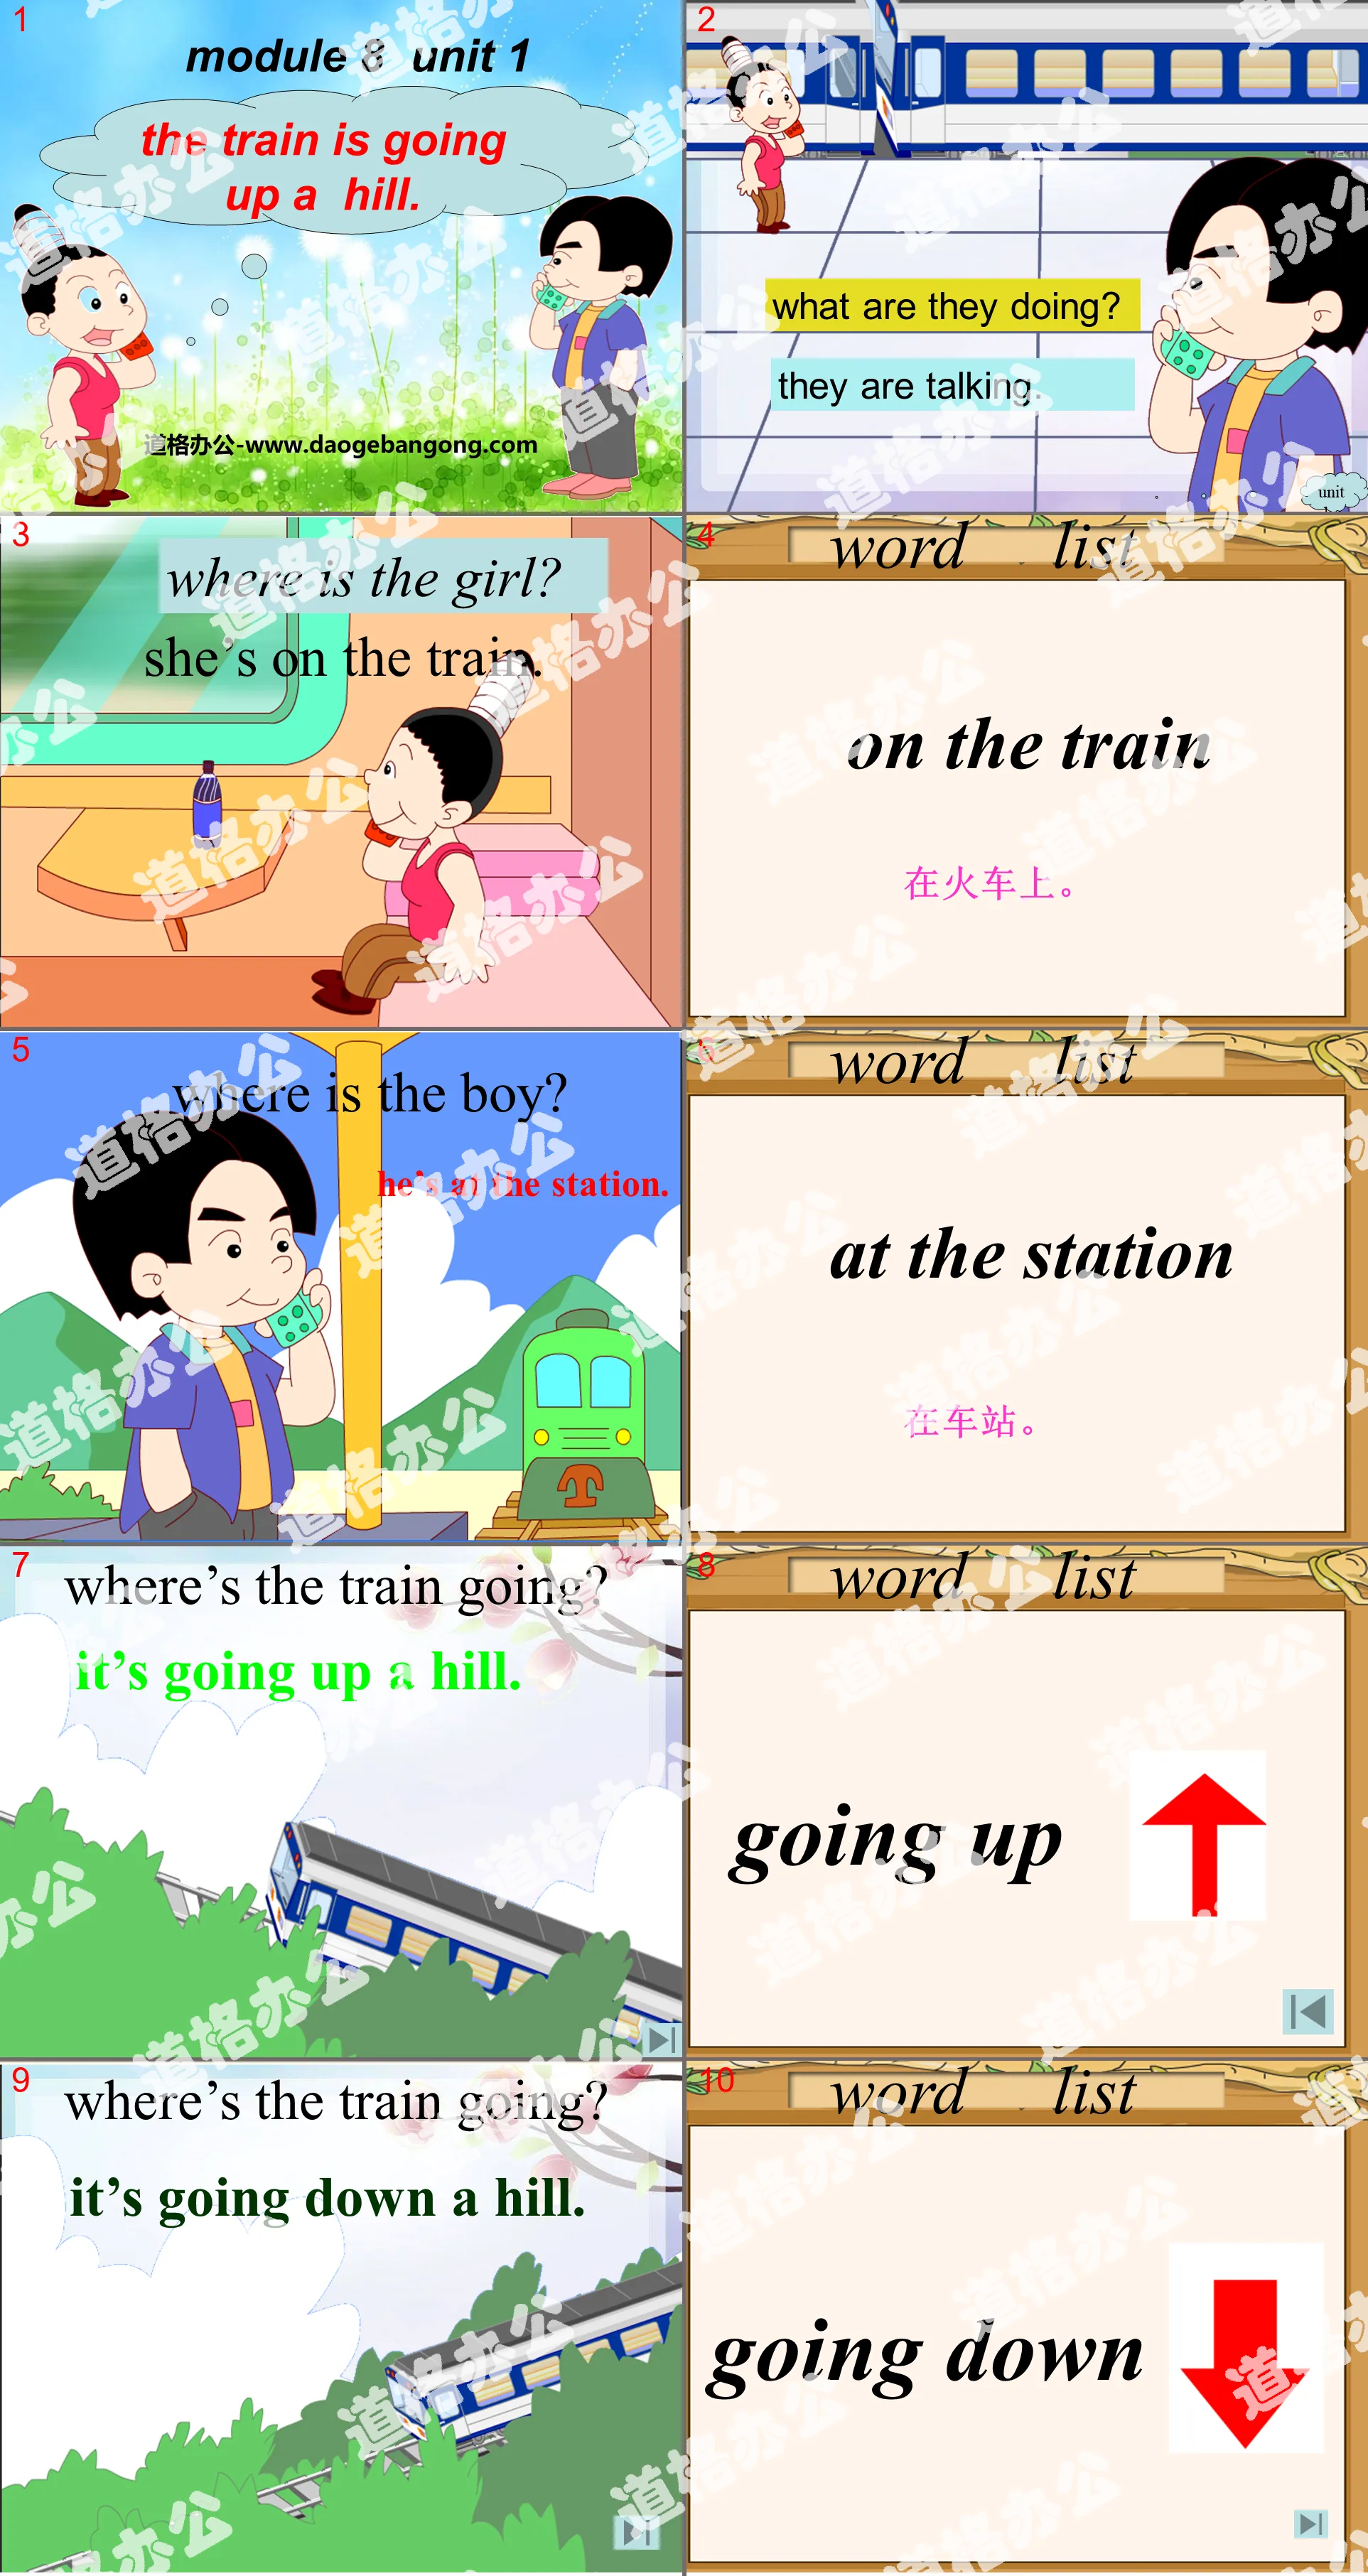 《The train is going up a hill》PPT課件